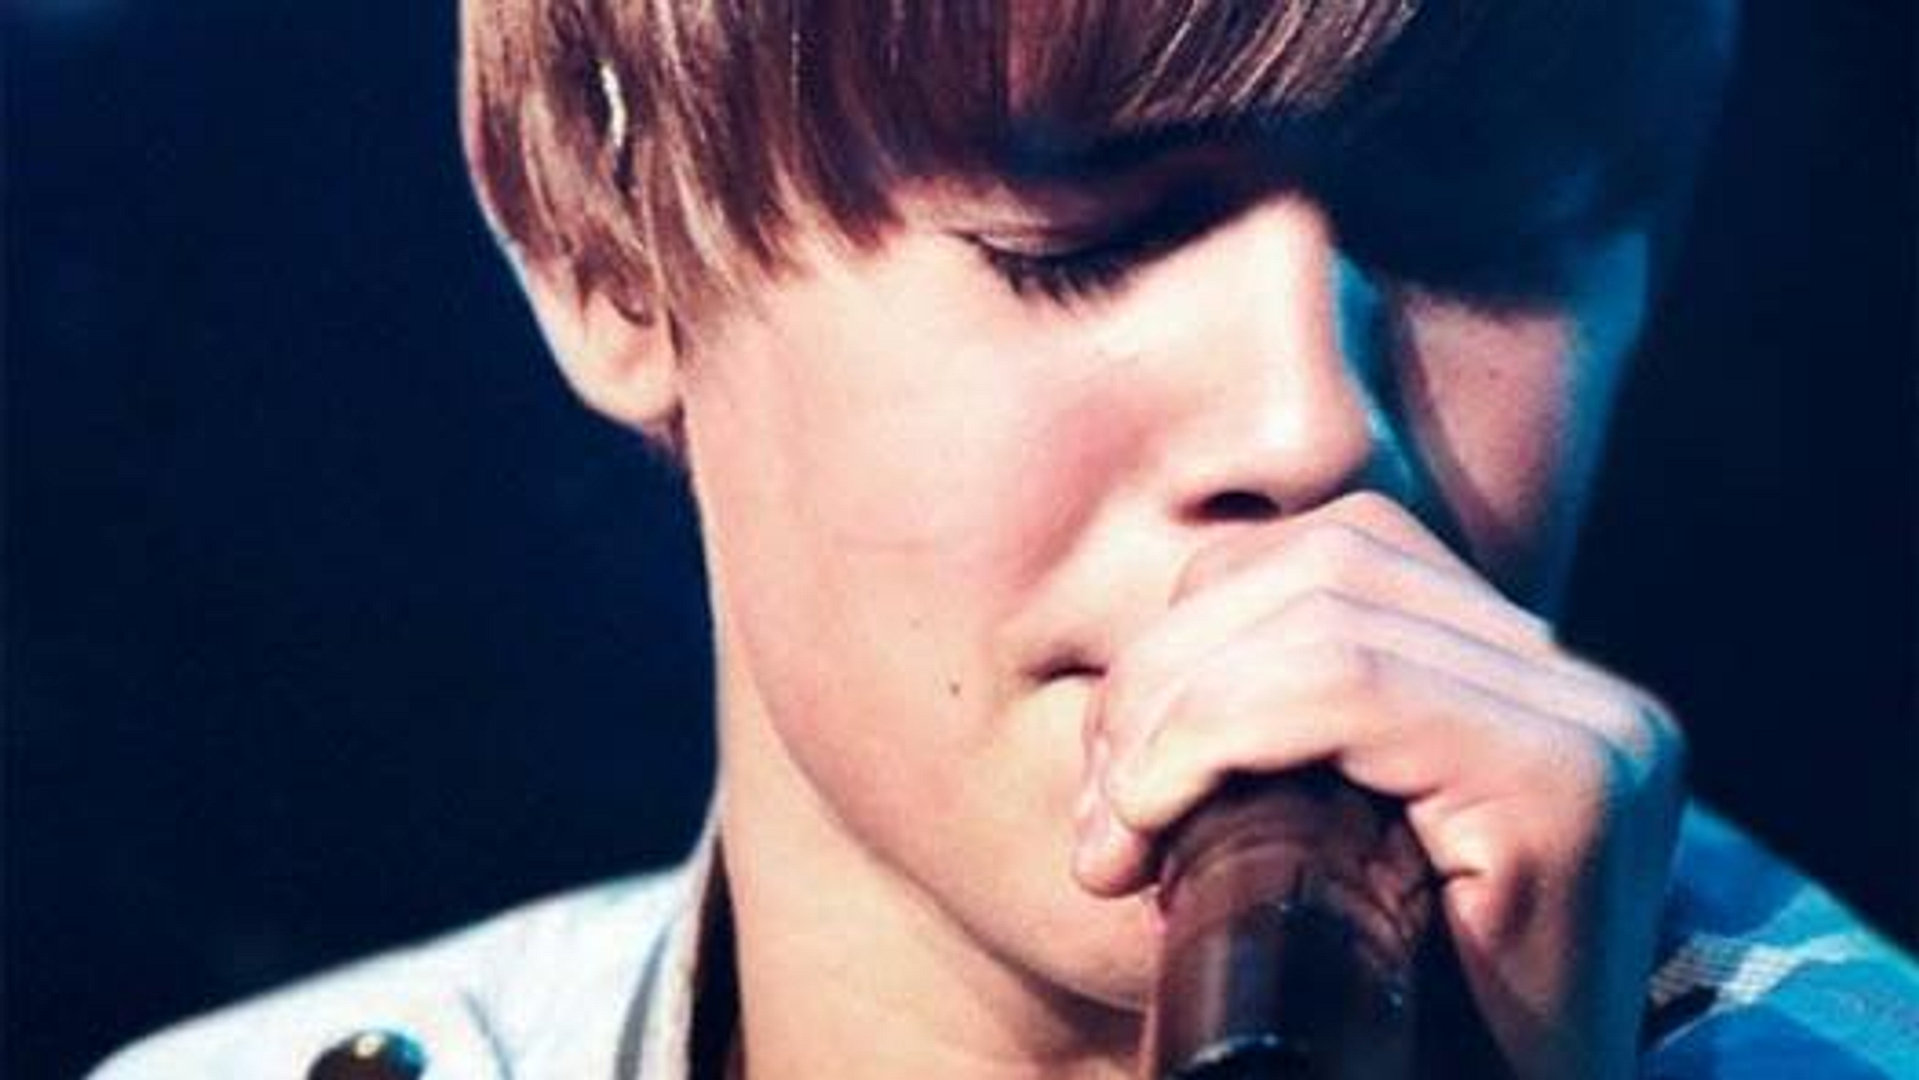 Justin Bieber - This is my world